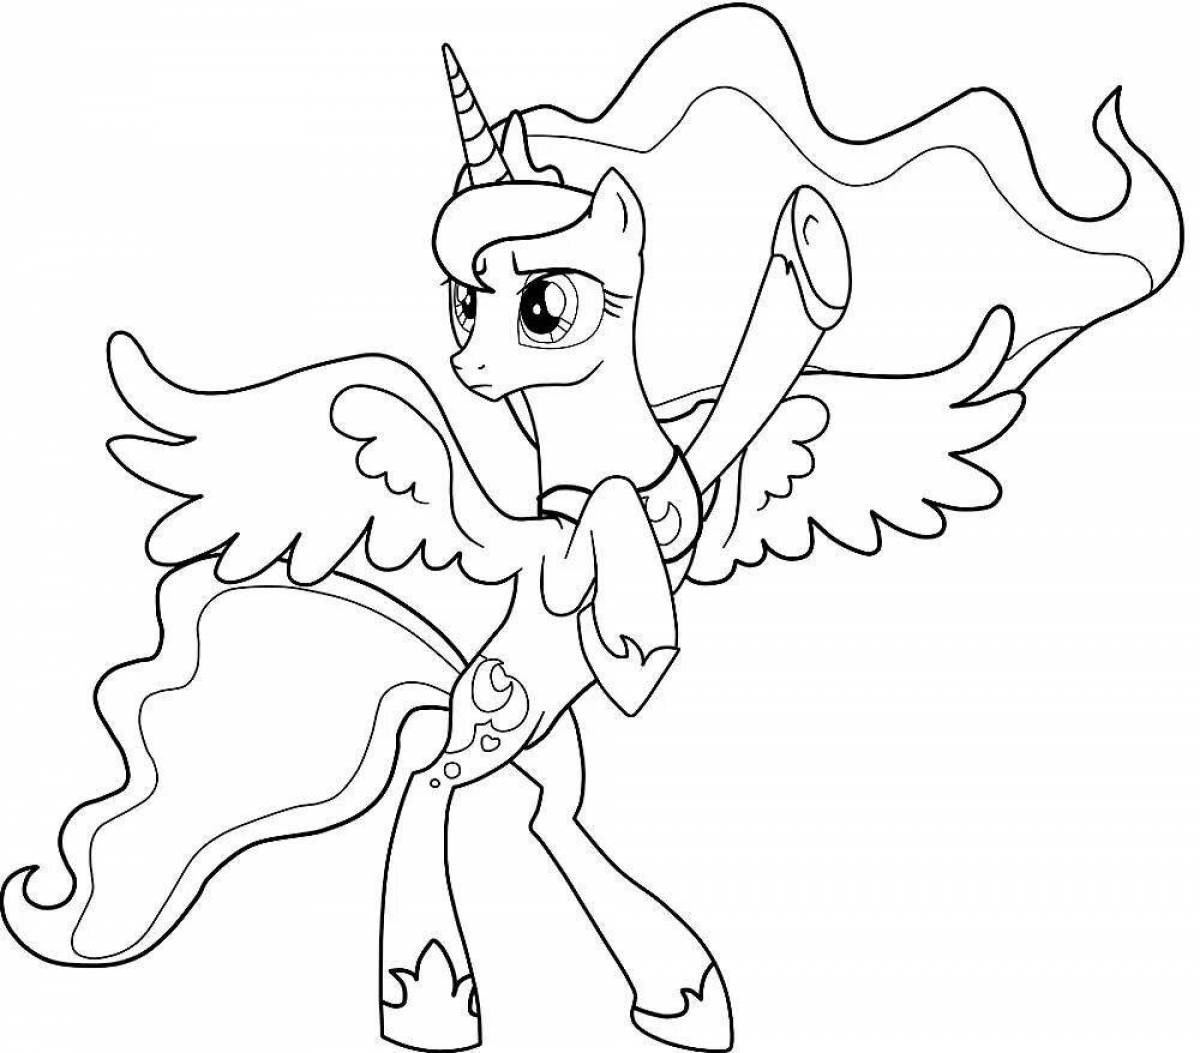 Coloring page glowing pony turn on